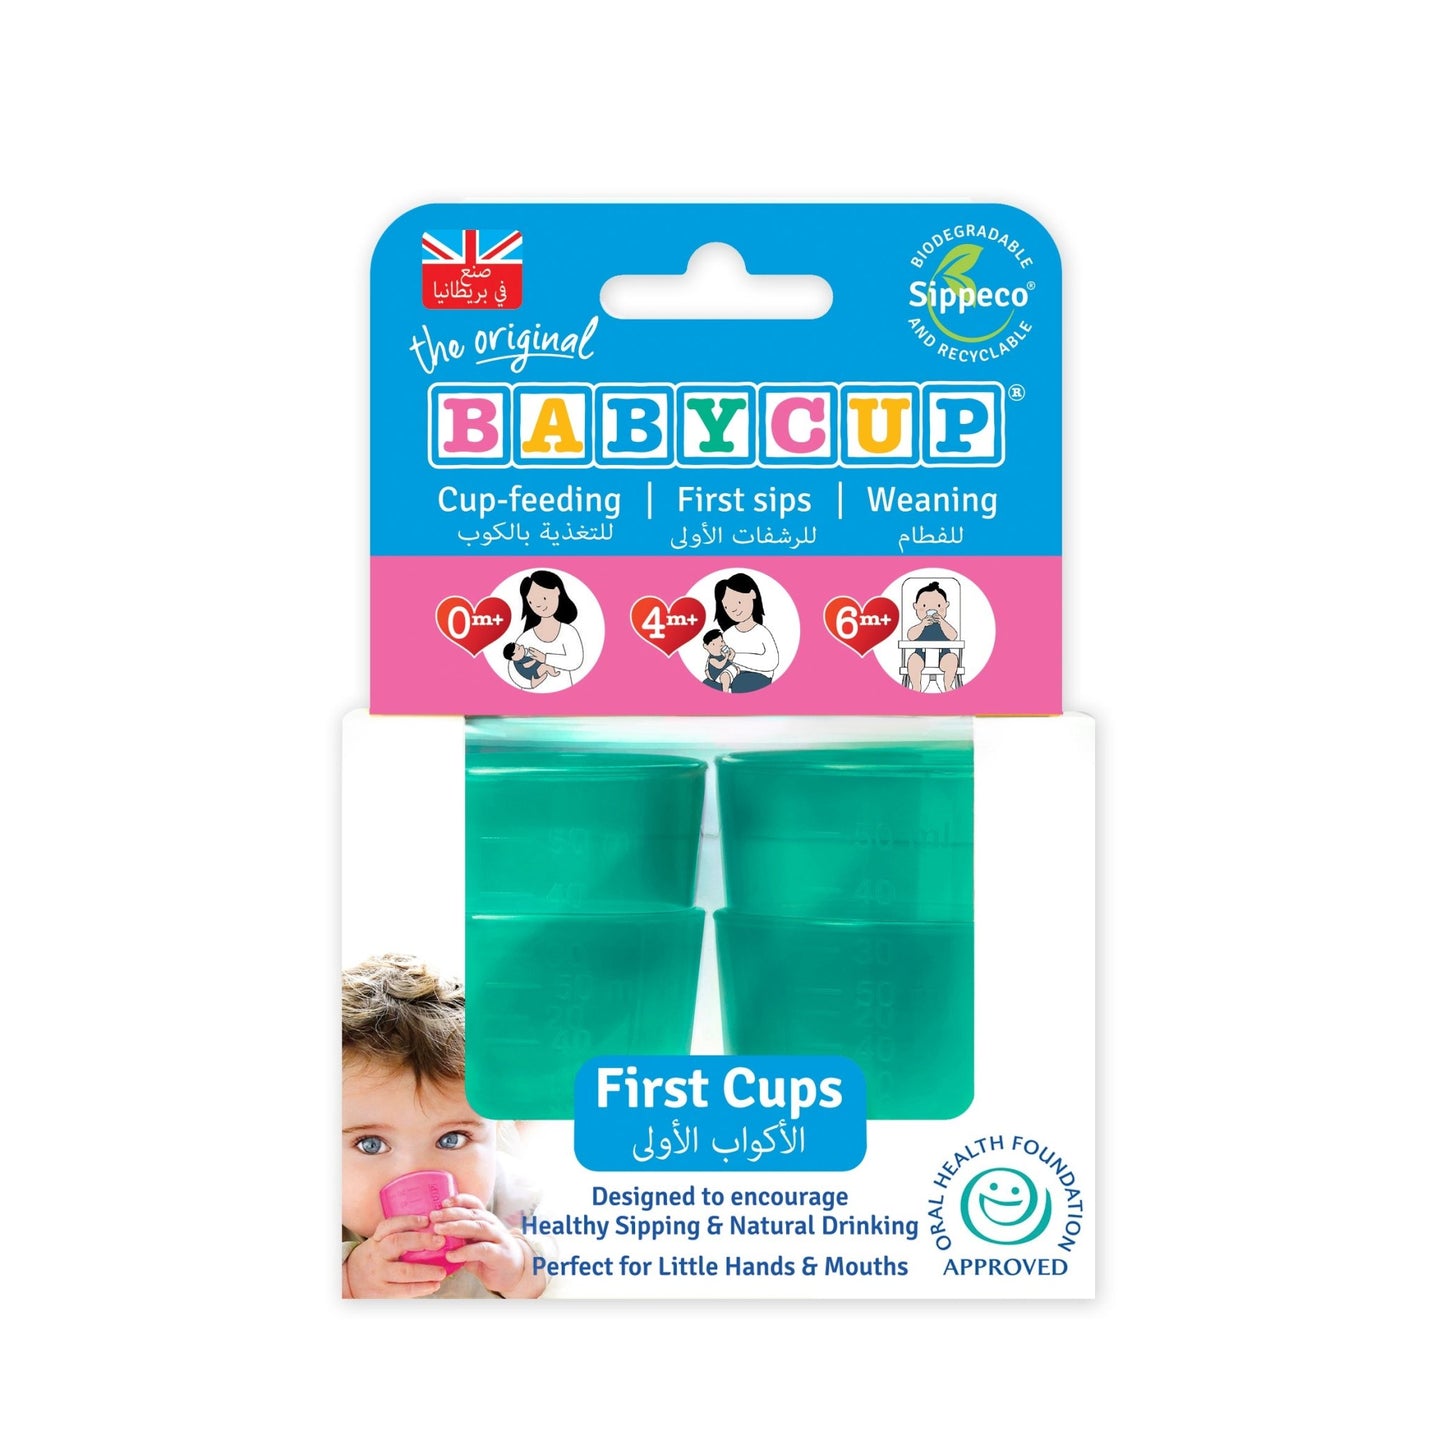 Babycup - Sippy Cups for Babies, Toddlers, Children - Green - Neo Essentials Store